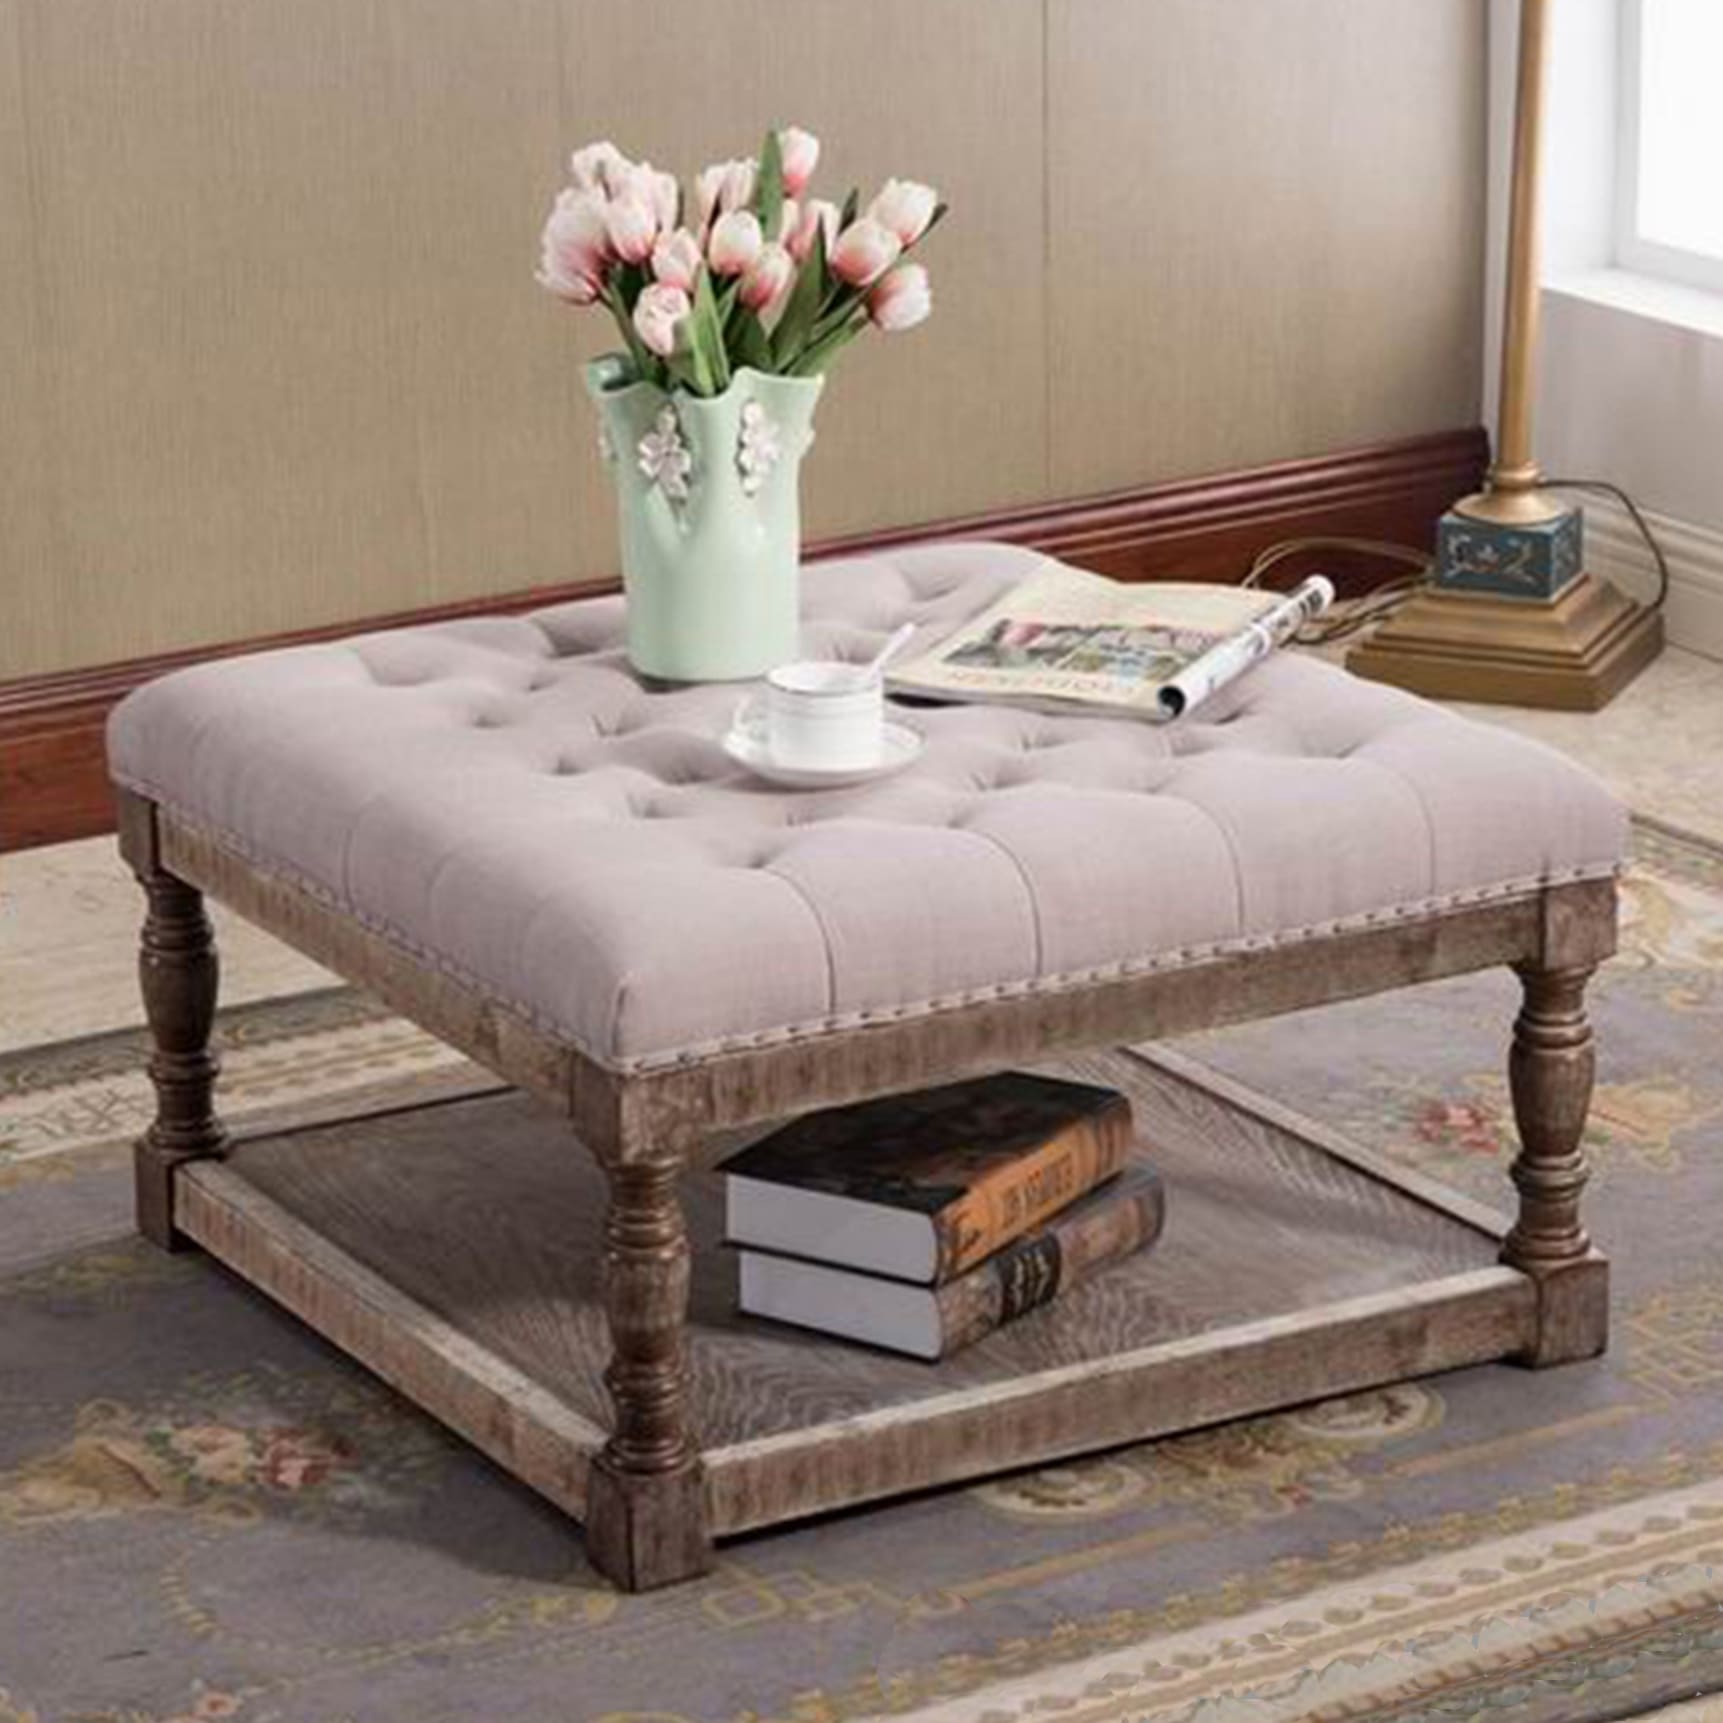 Cairona Fabric 30 Inch Tufted Shelved Ottoman Optional Colors On Sale Overstock 13681209